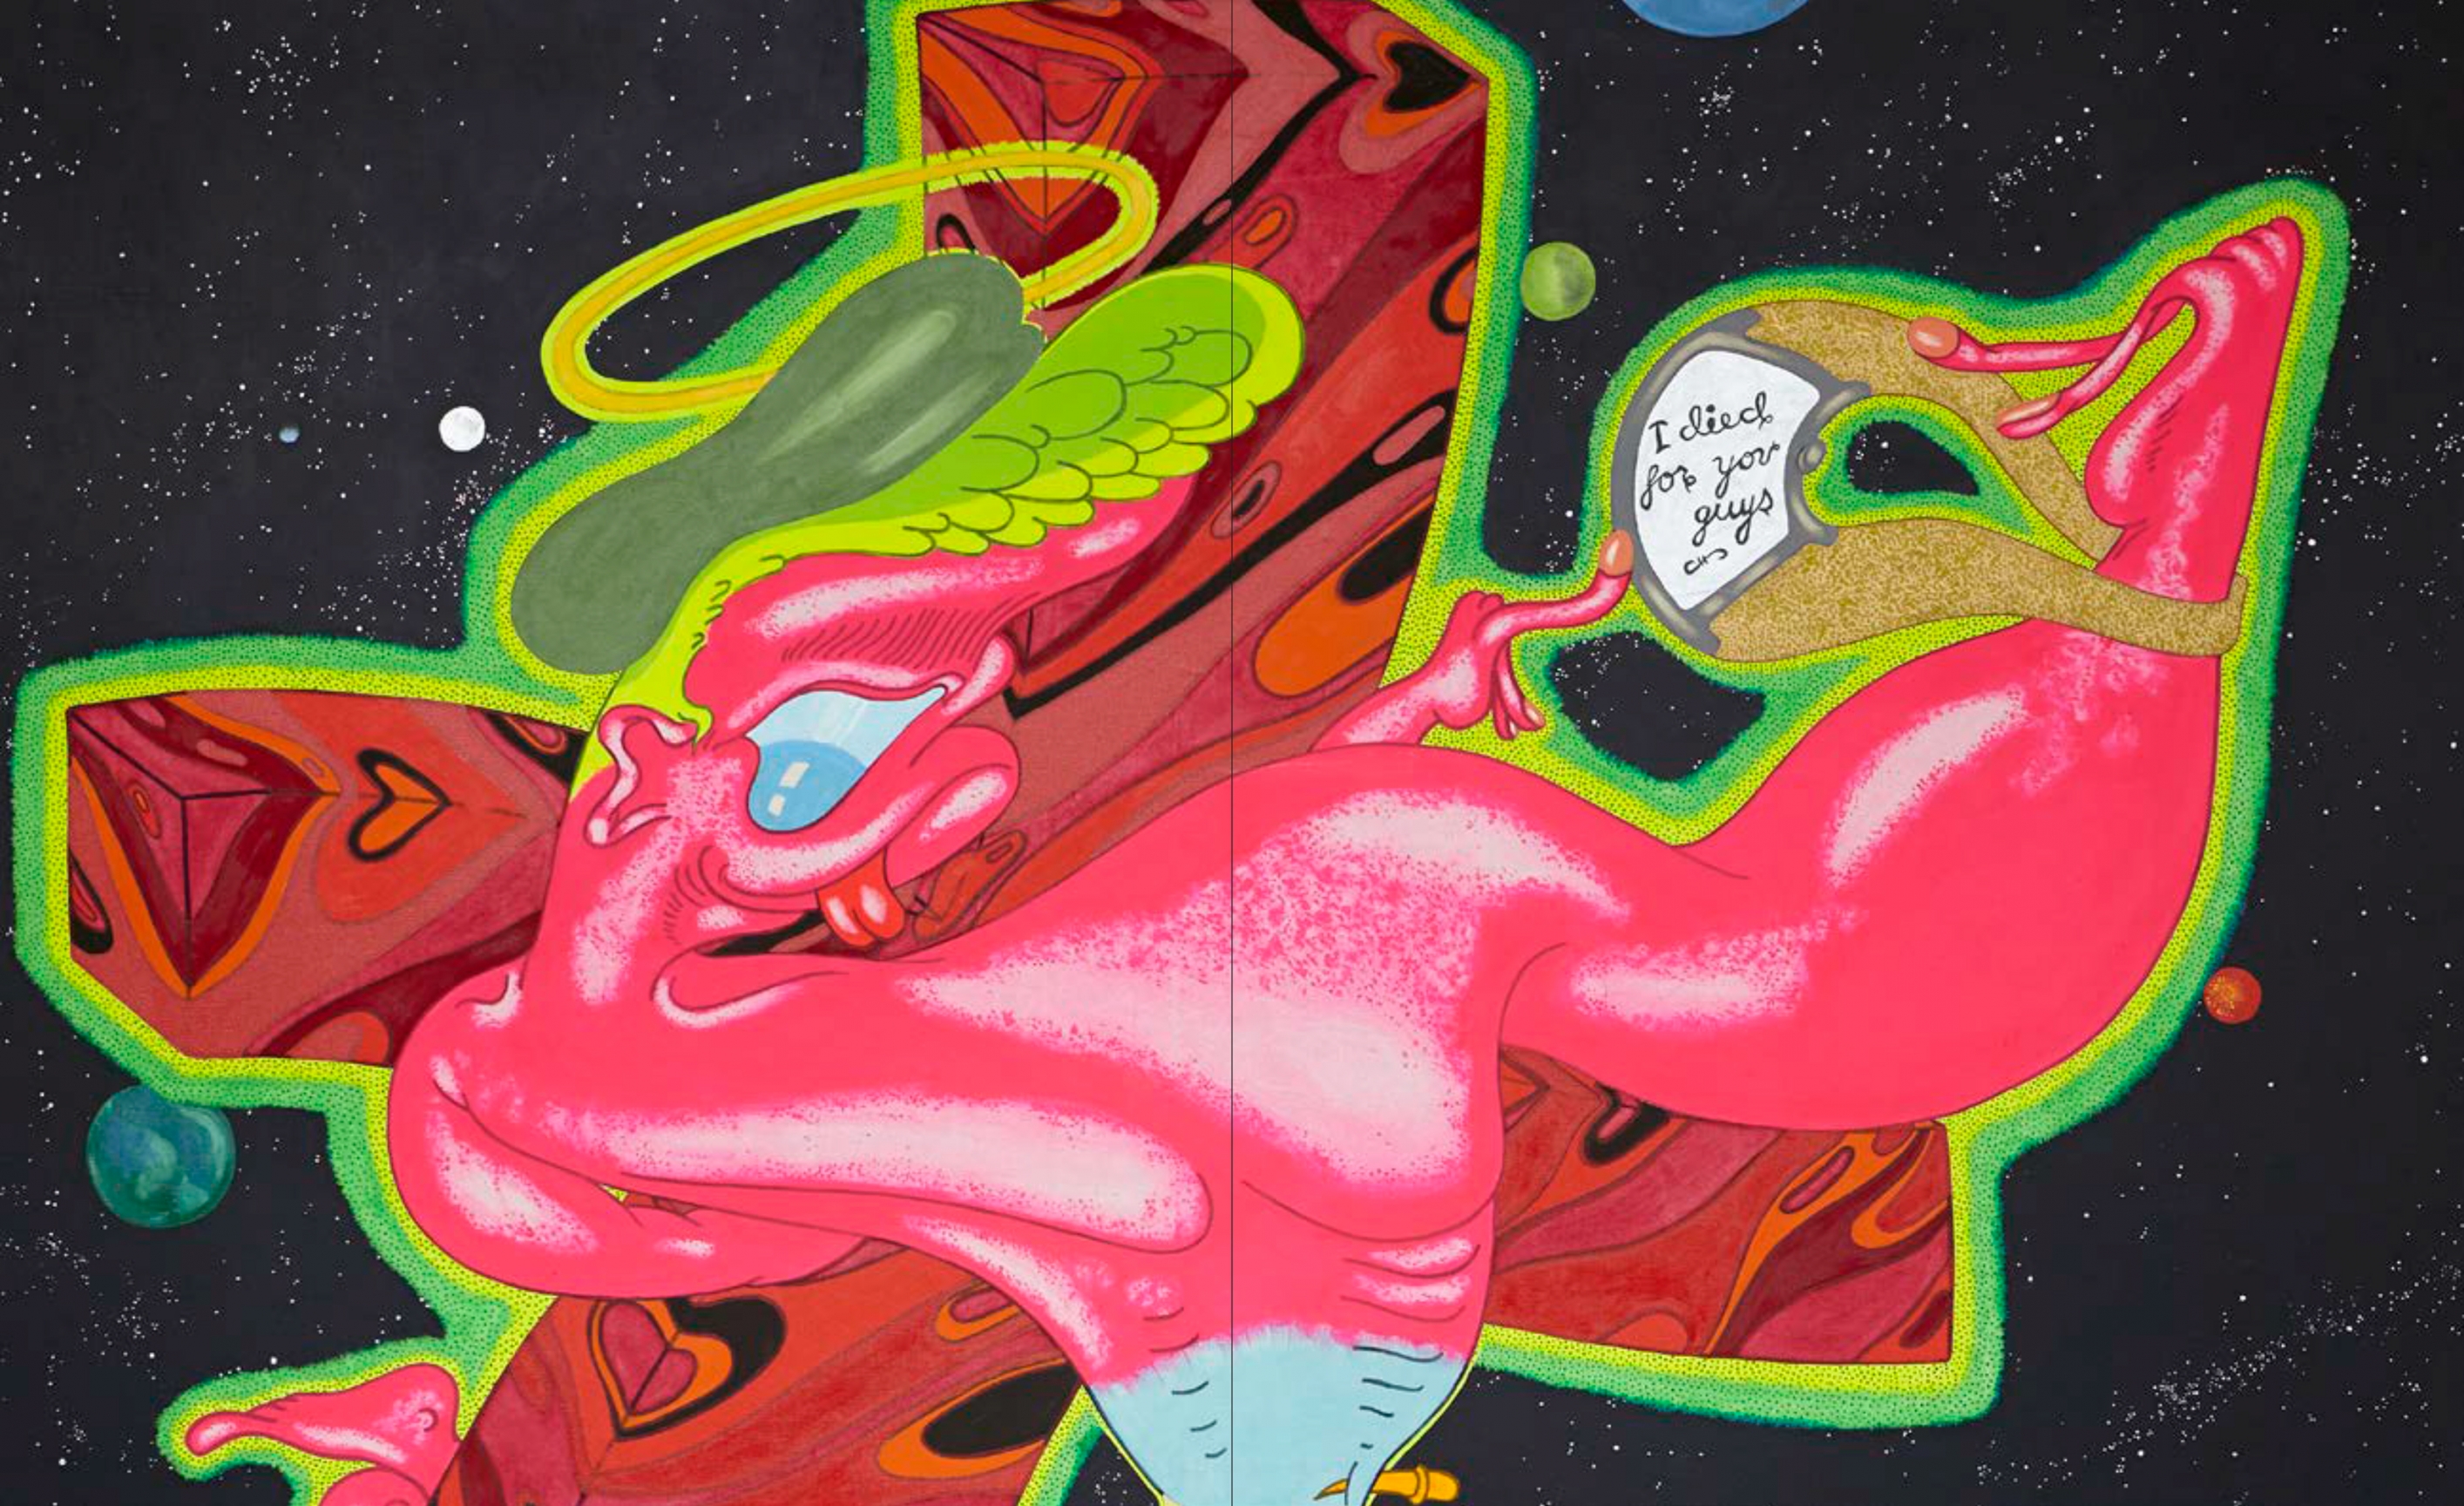 Interior view of Peter Saul: From Pop to Punk, published by Venus Over Manhattan, New York, 2015